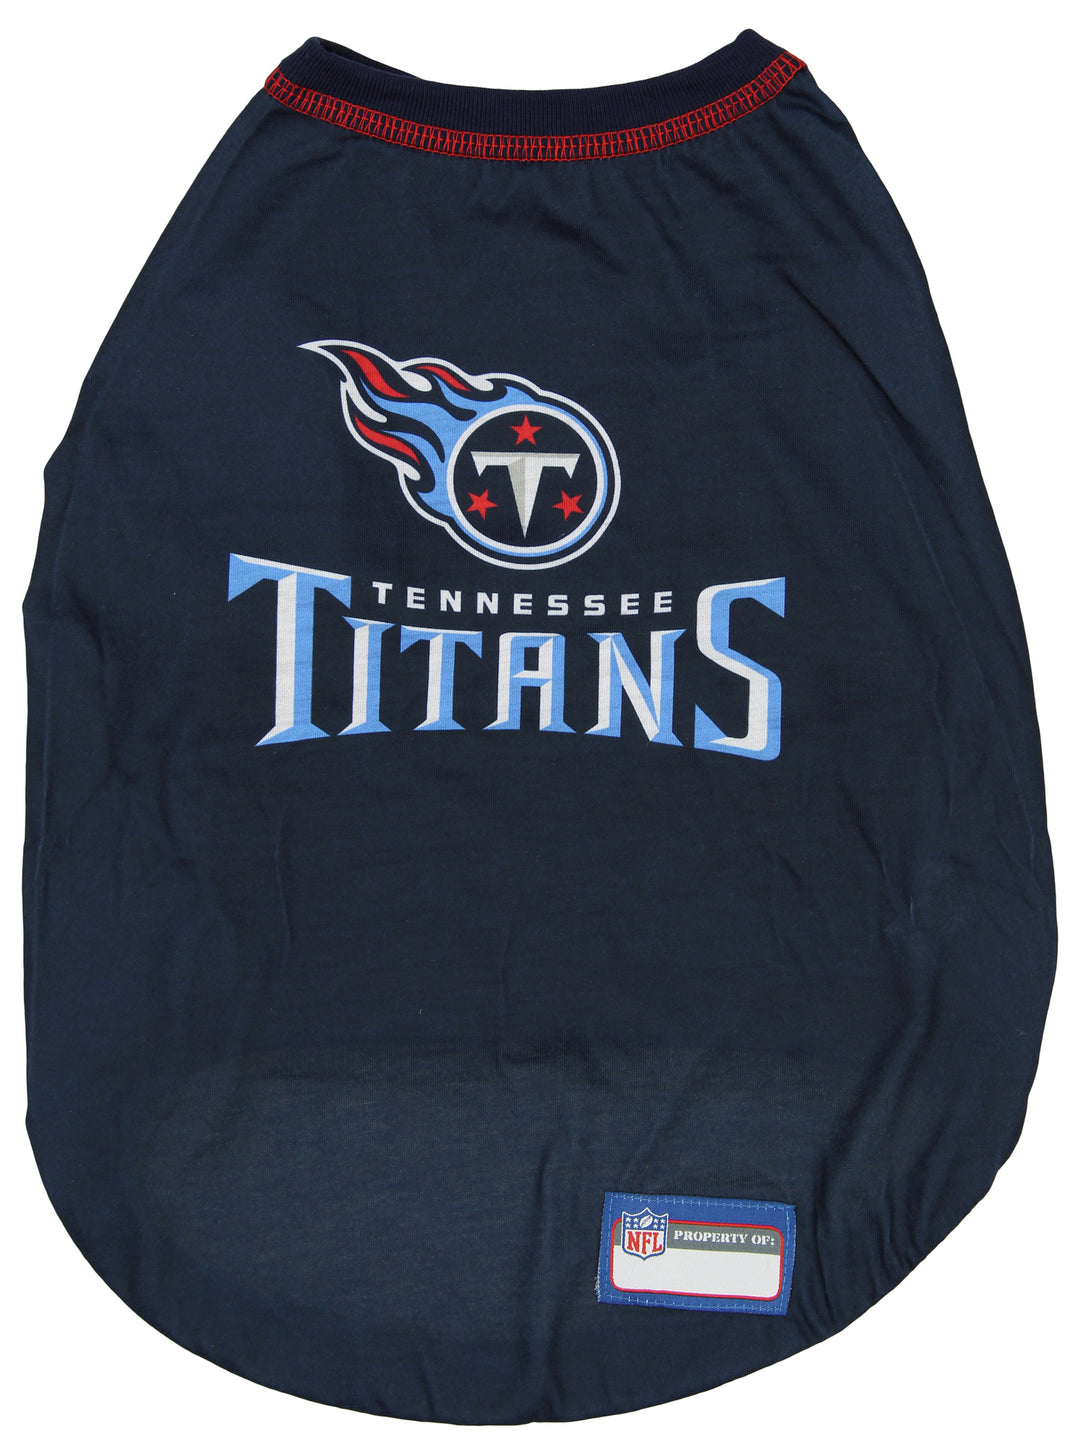 Zubaz X Pets First NFL Tennessee Titans Team Pet T-Shirt For Dogs